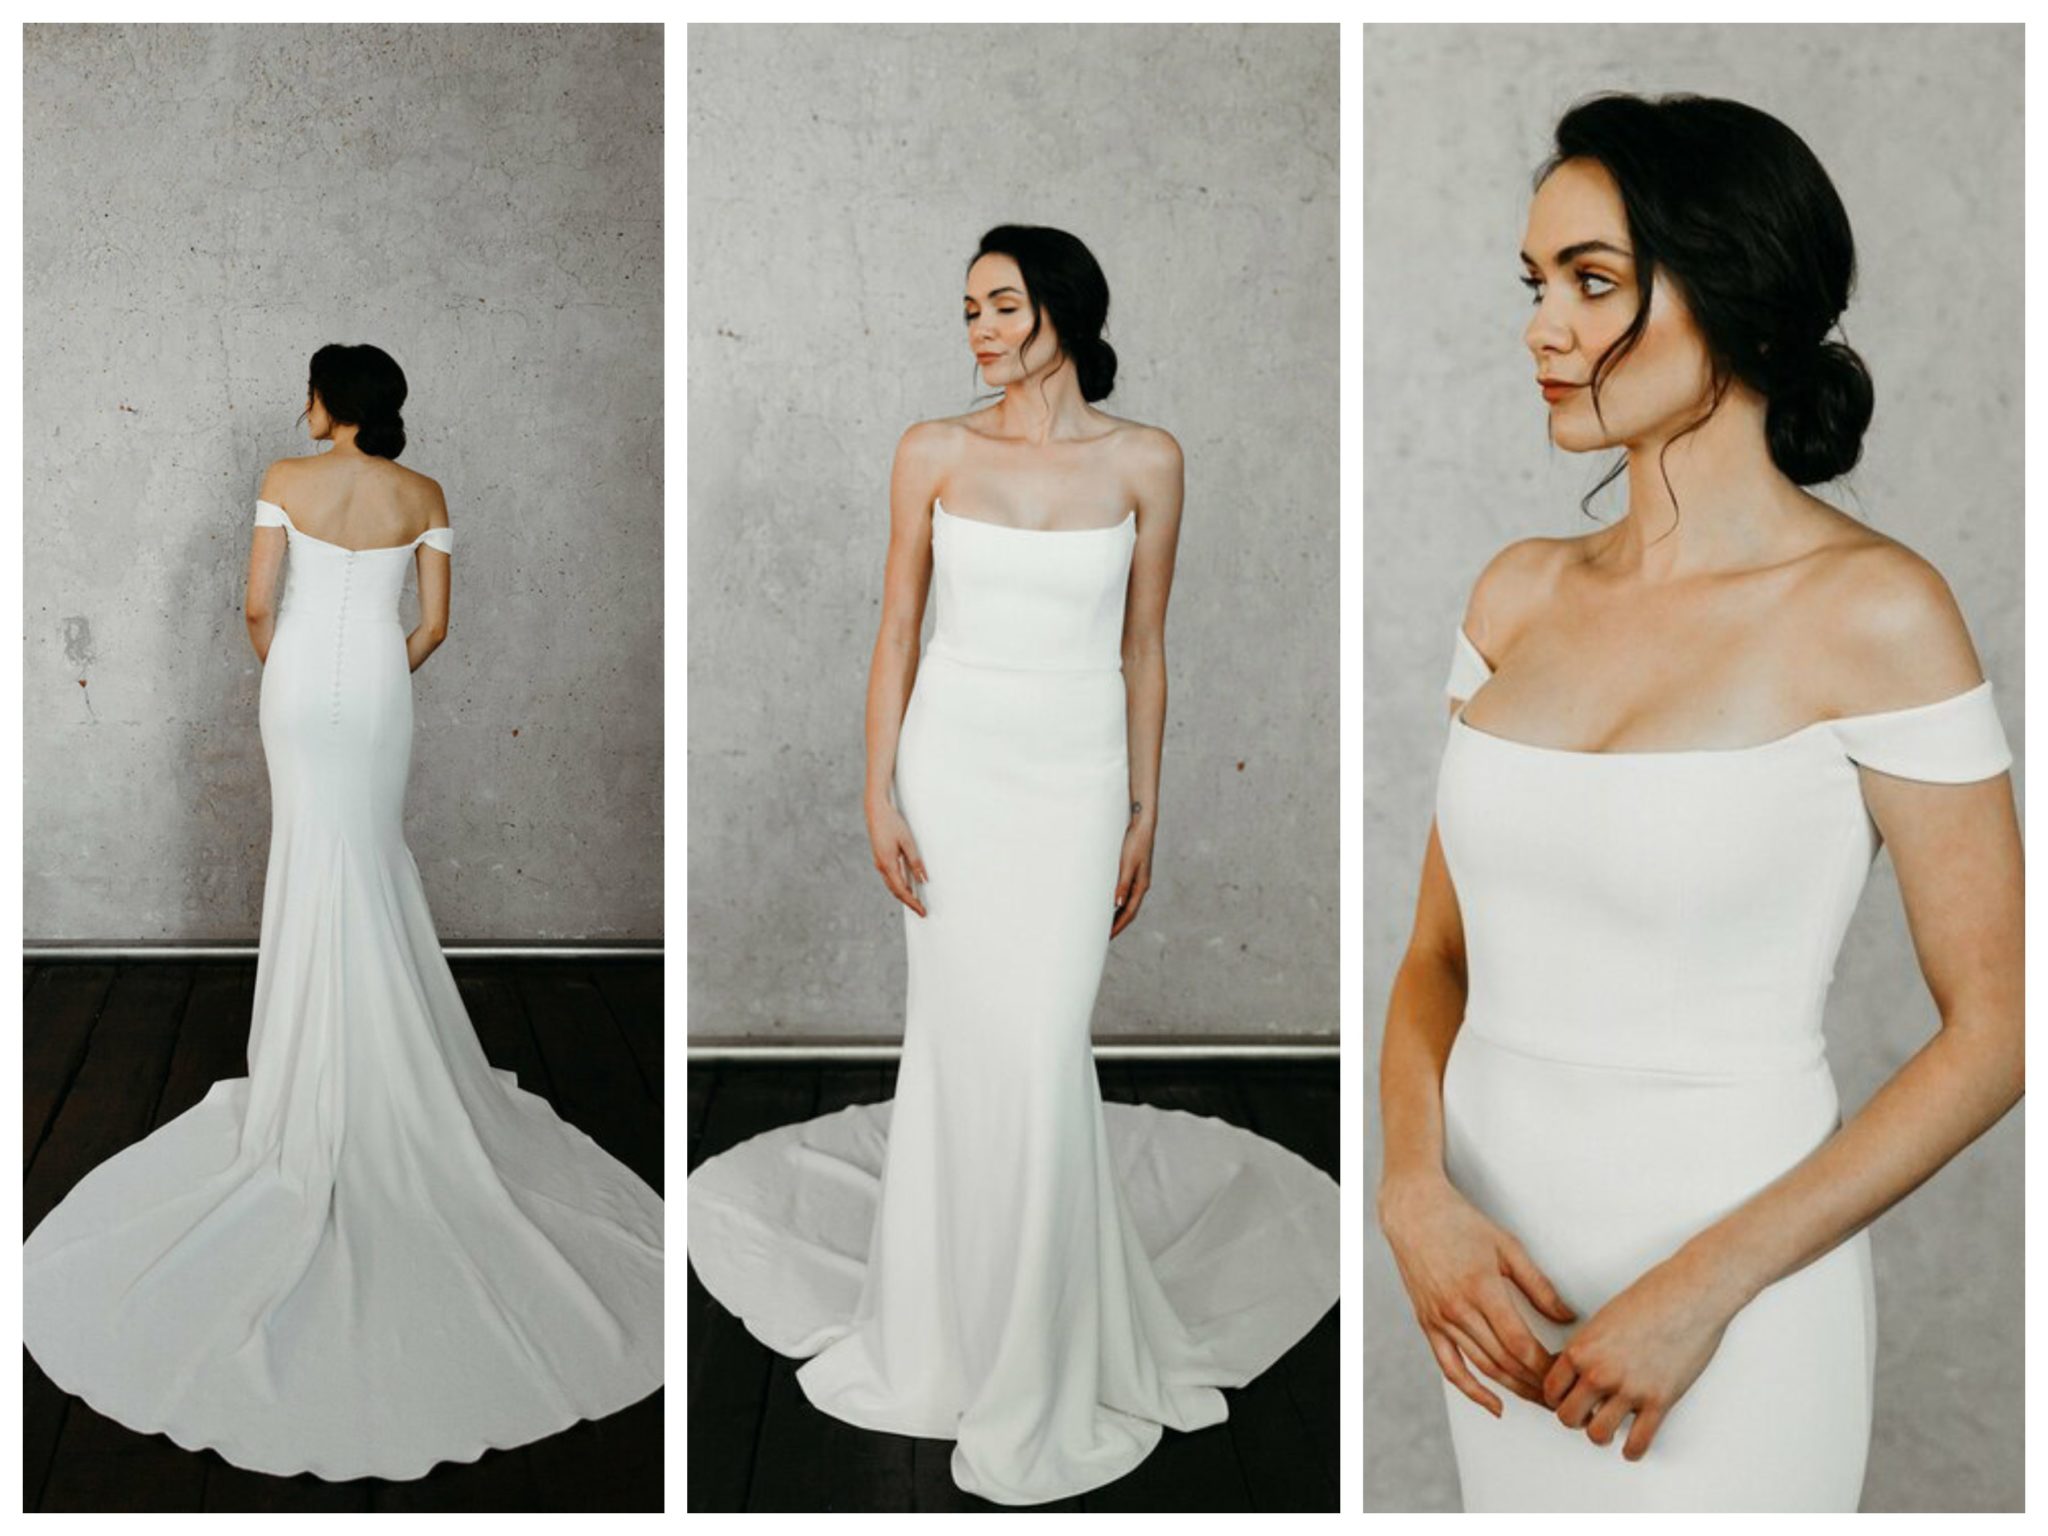 6 Wedding Dresses For Broad Shoulders Love And Lace Bridal Salon